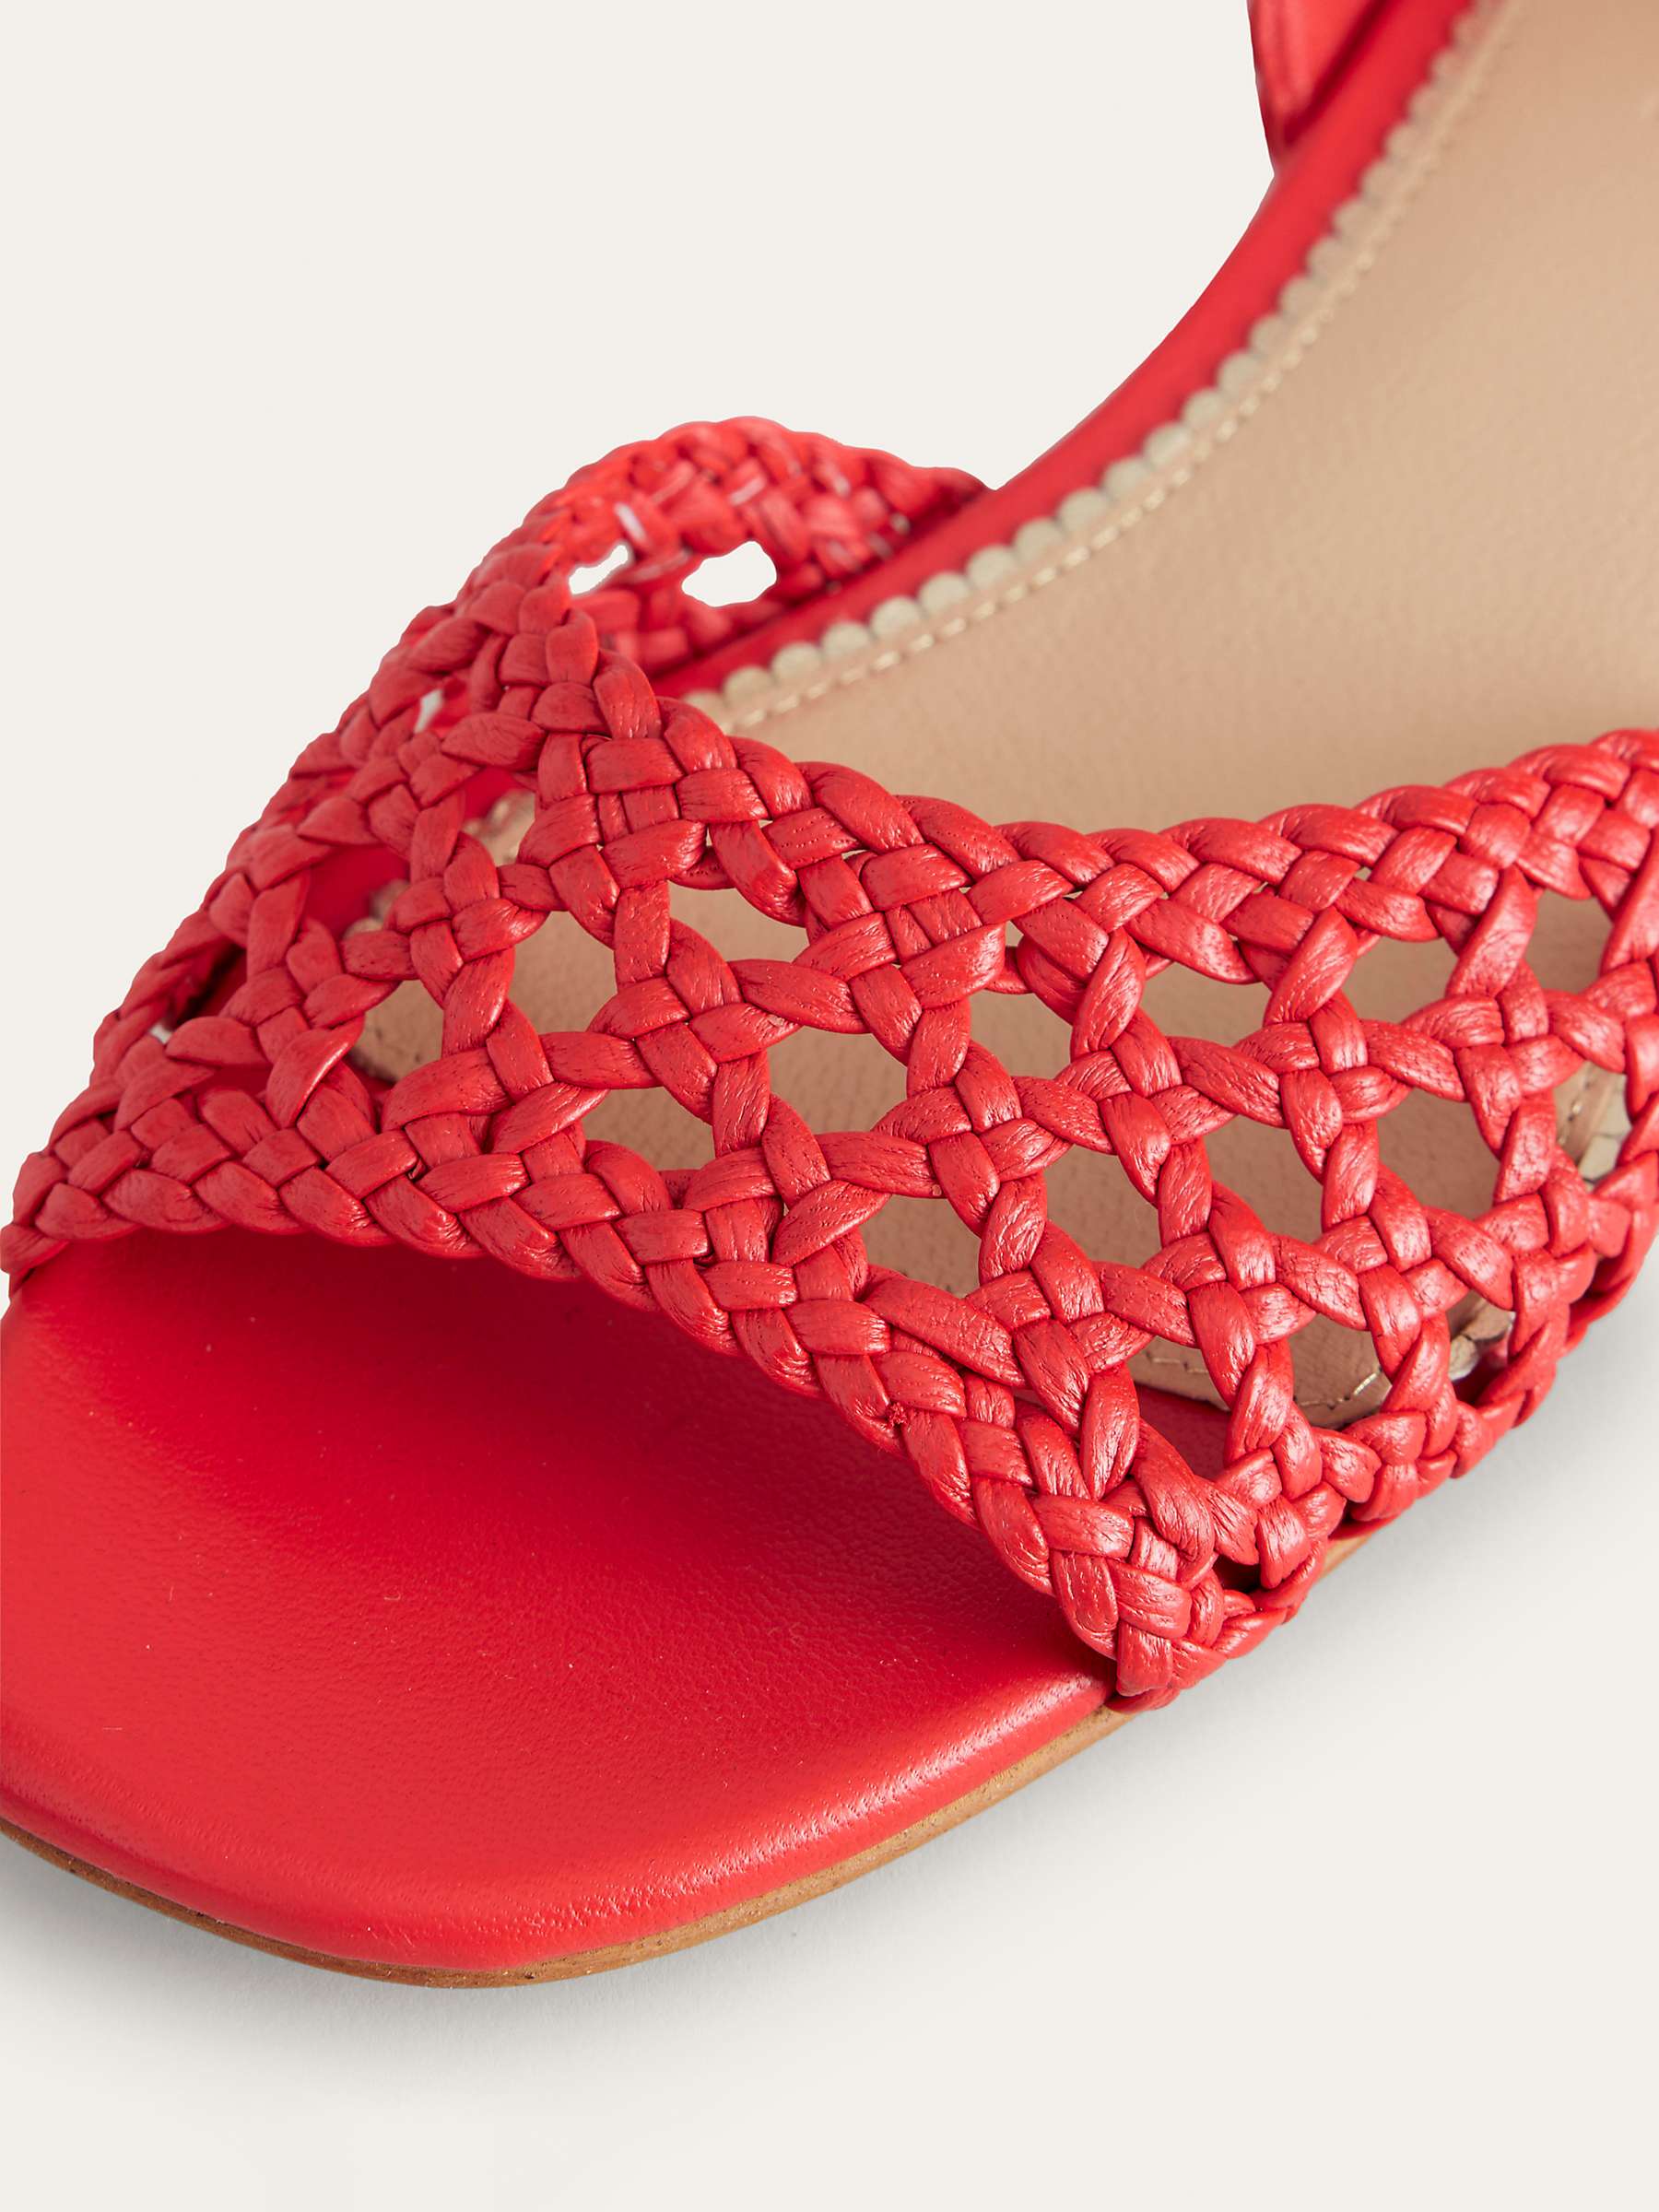 Buy Boden Woven Flat Sandals, Post Box Red Online at johnlewis.com